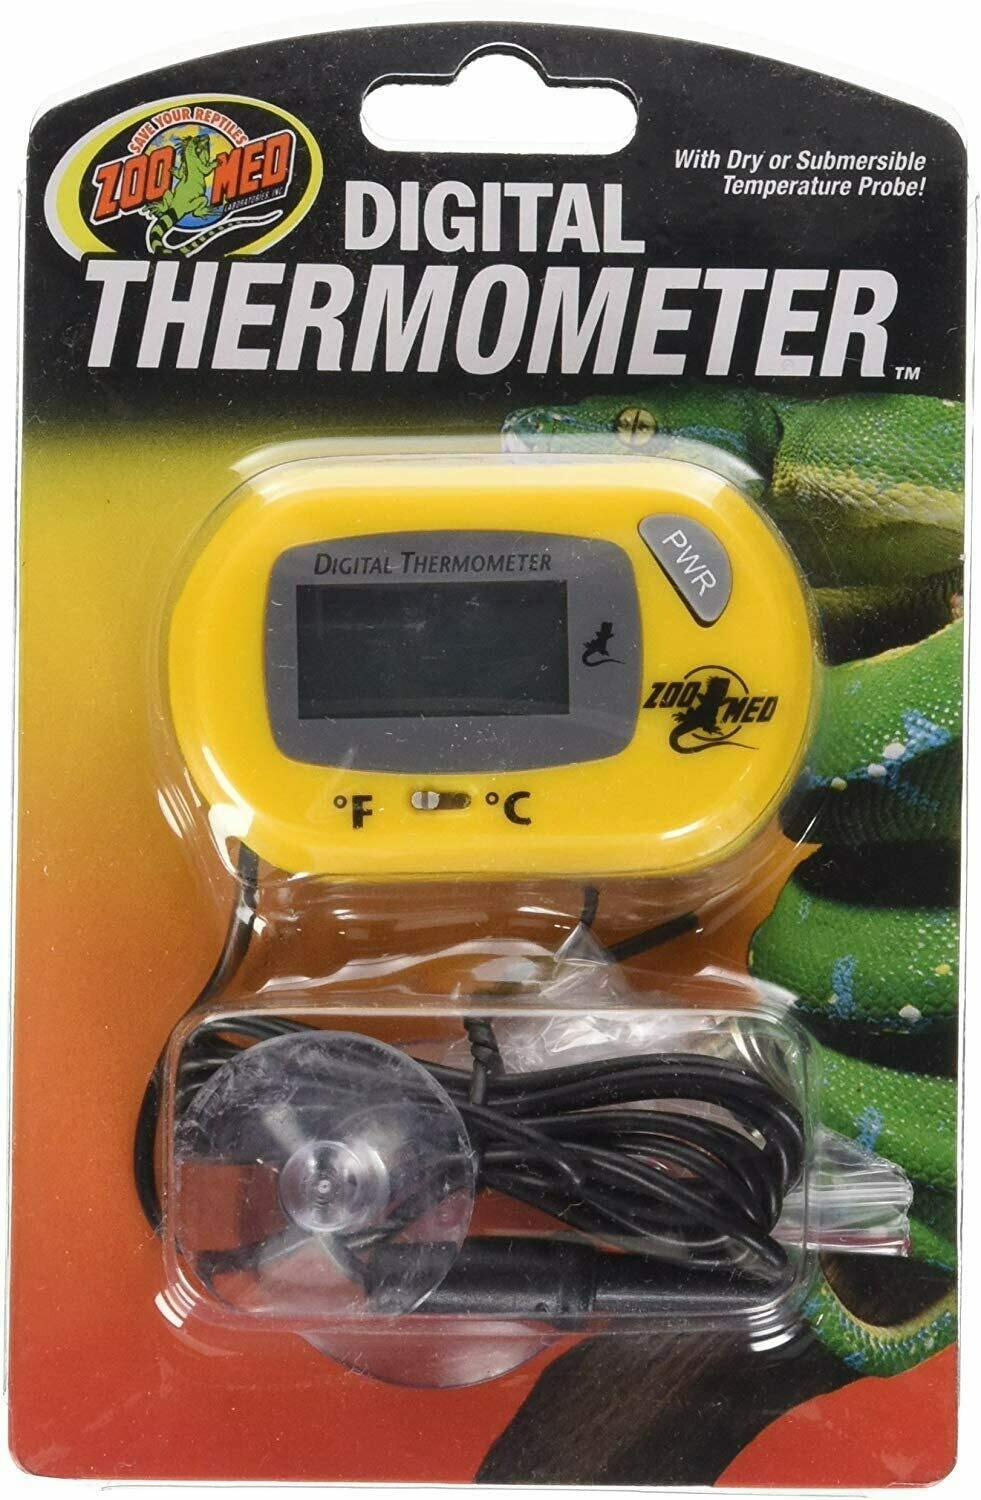 ZooMed - Digital Thermometer